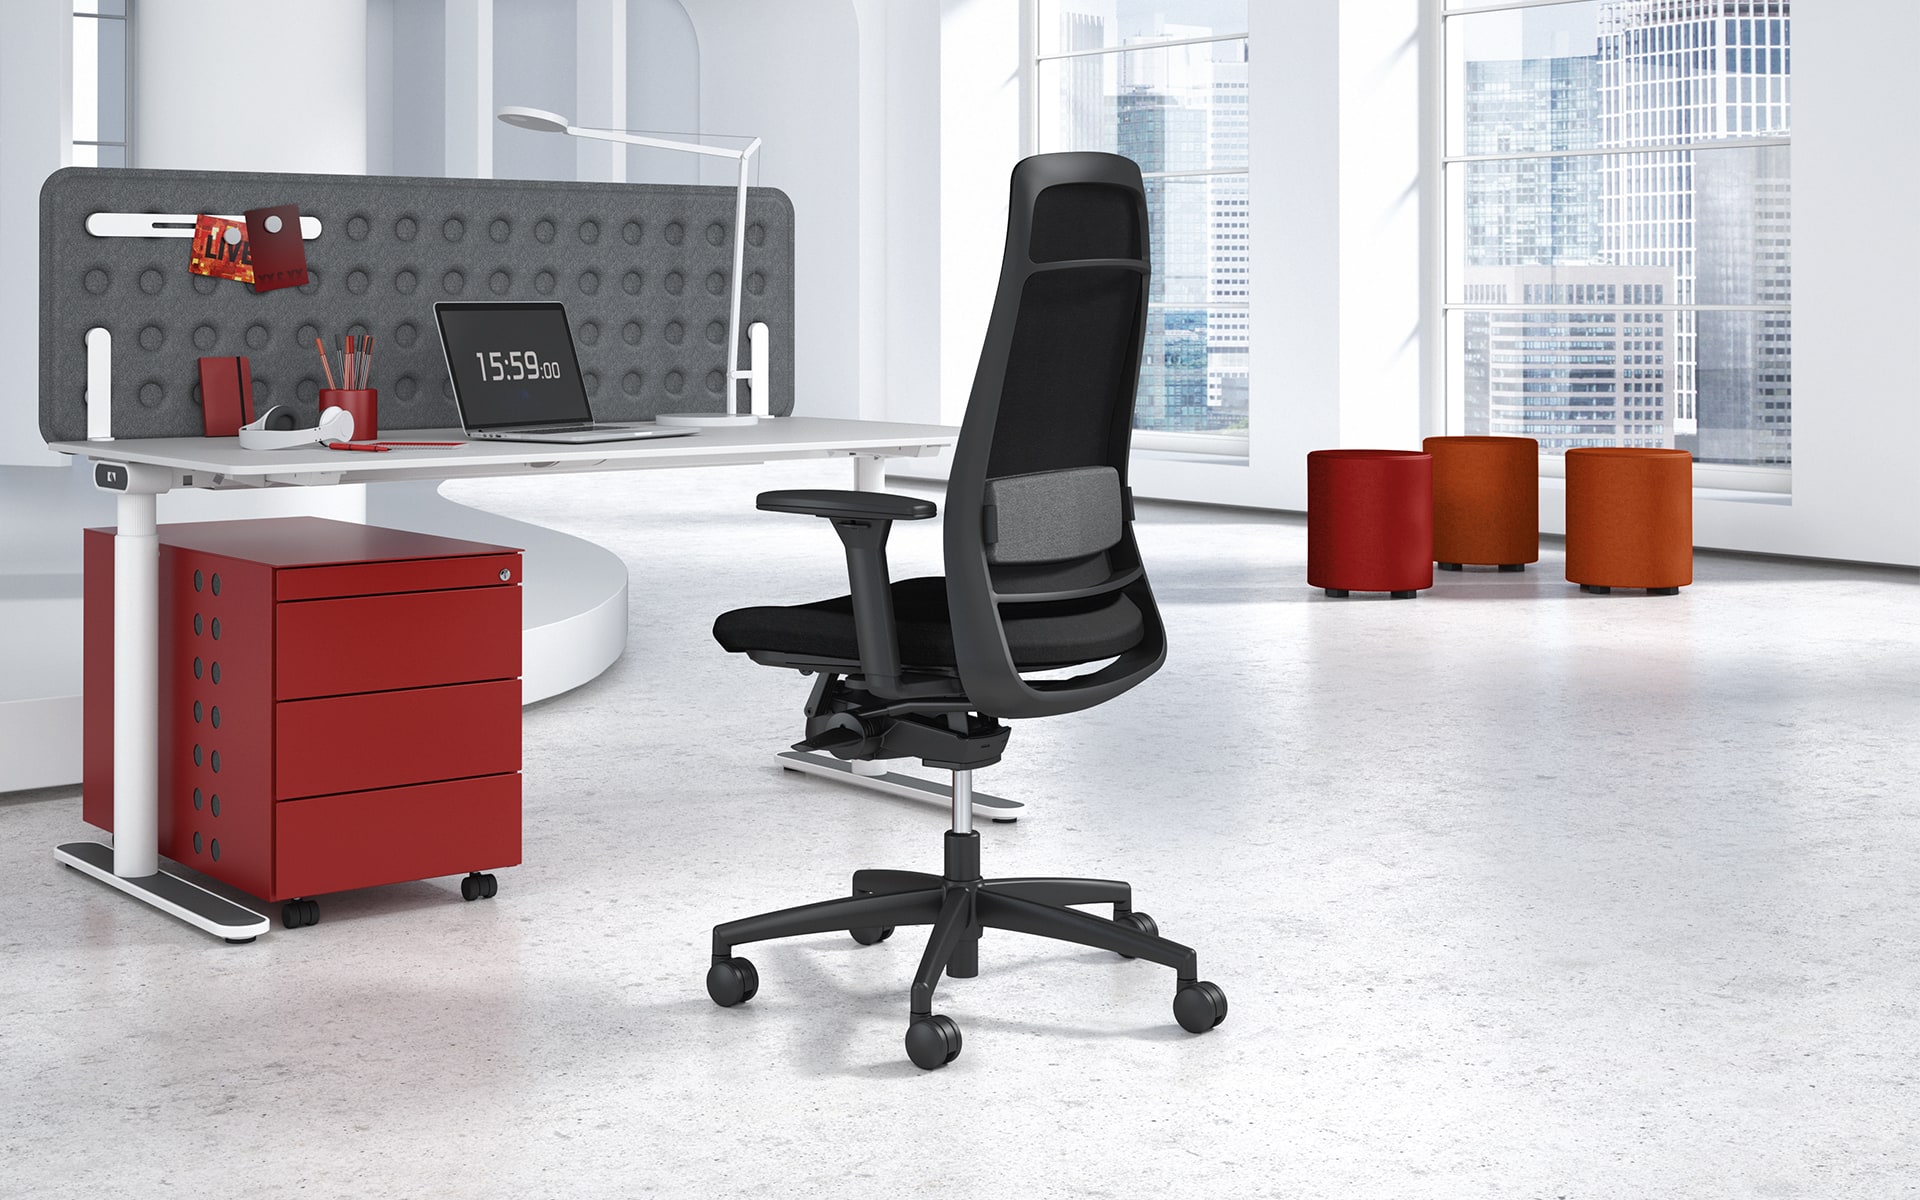 Black K+N Tensa Next office chair by ITO Design in spacious workspace with red accents